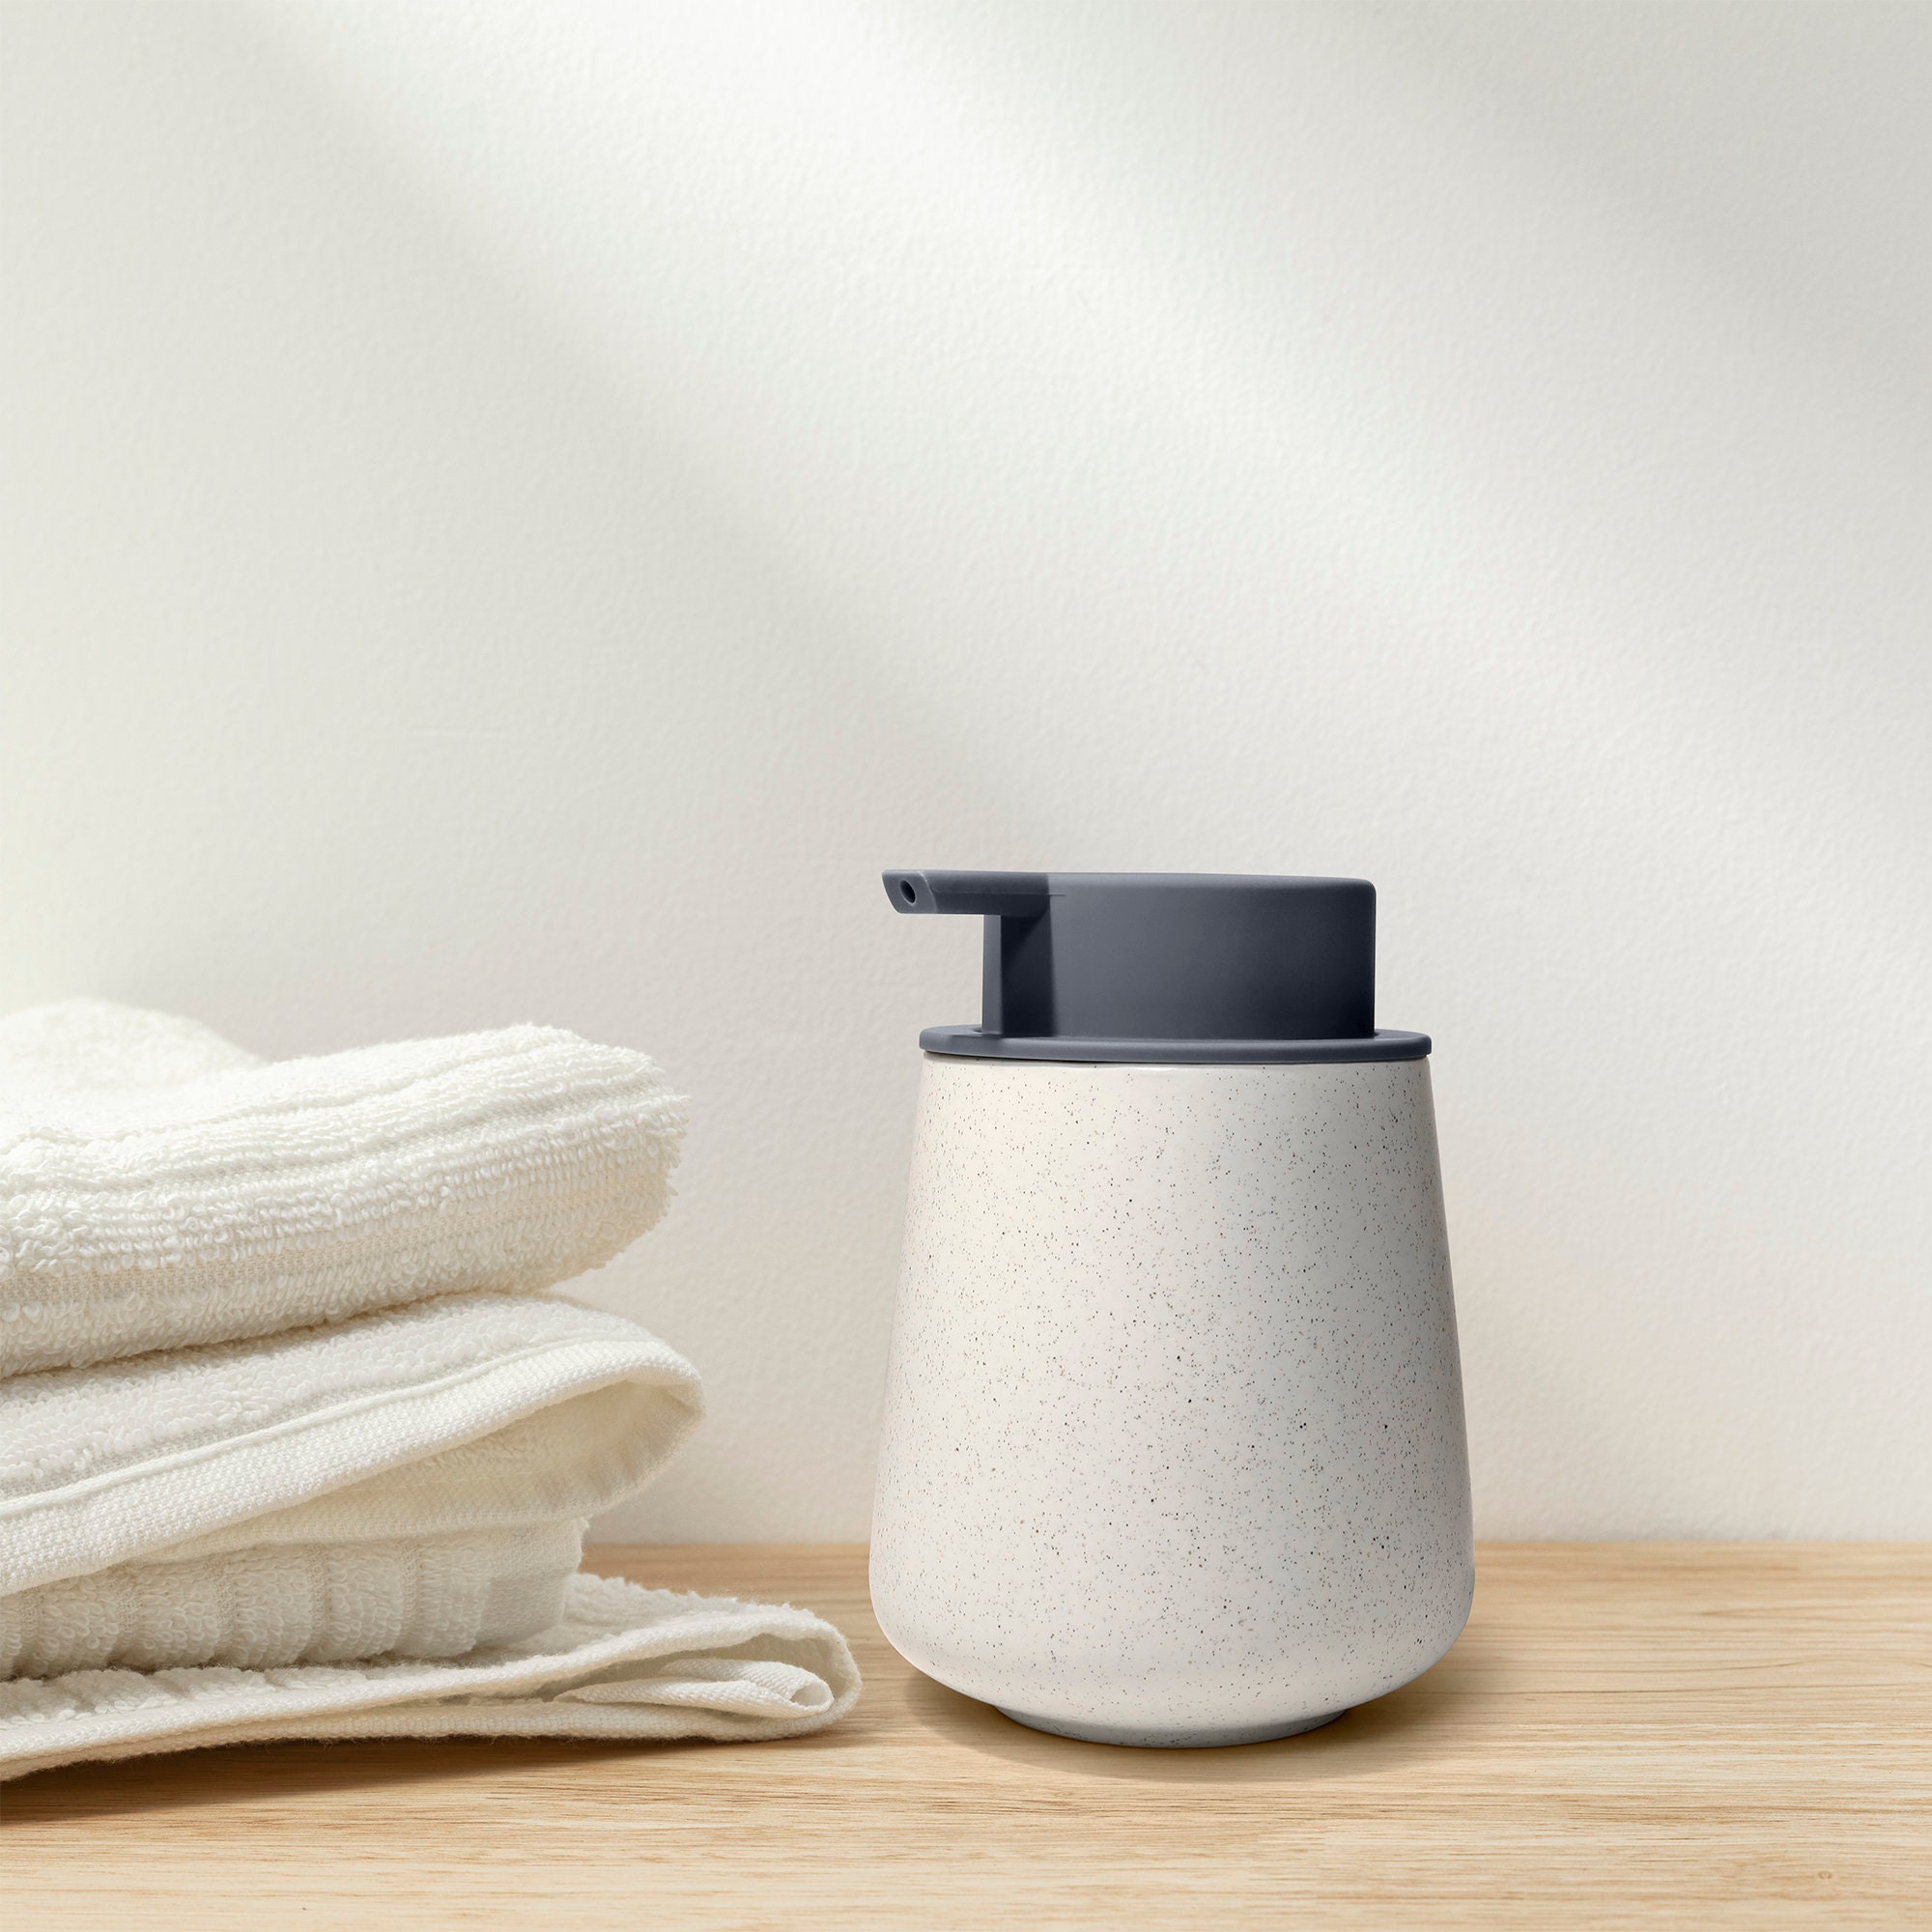 Buy Off White Ceramic Liquid Soap Dispenser - Stone Finish, Bath  Accessories at the best price on Monday, February 26, 2024 at 8:43 am +0530  with latest offers in India. Get Free